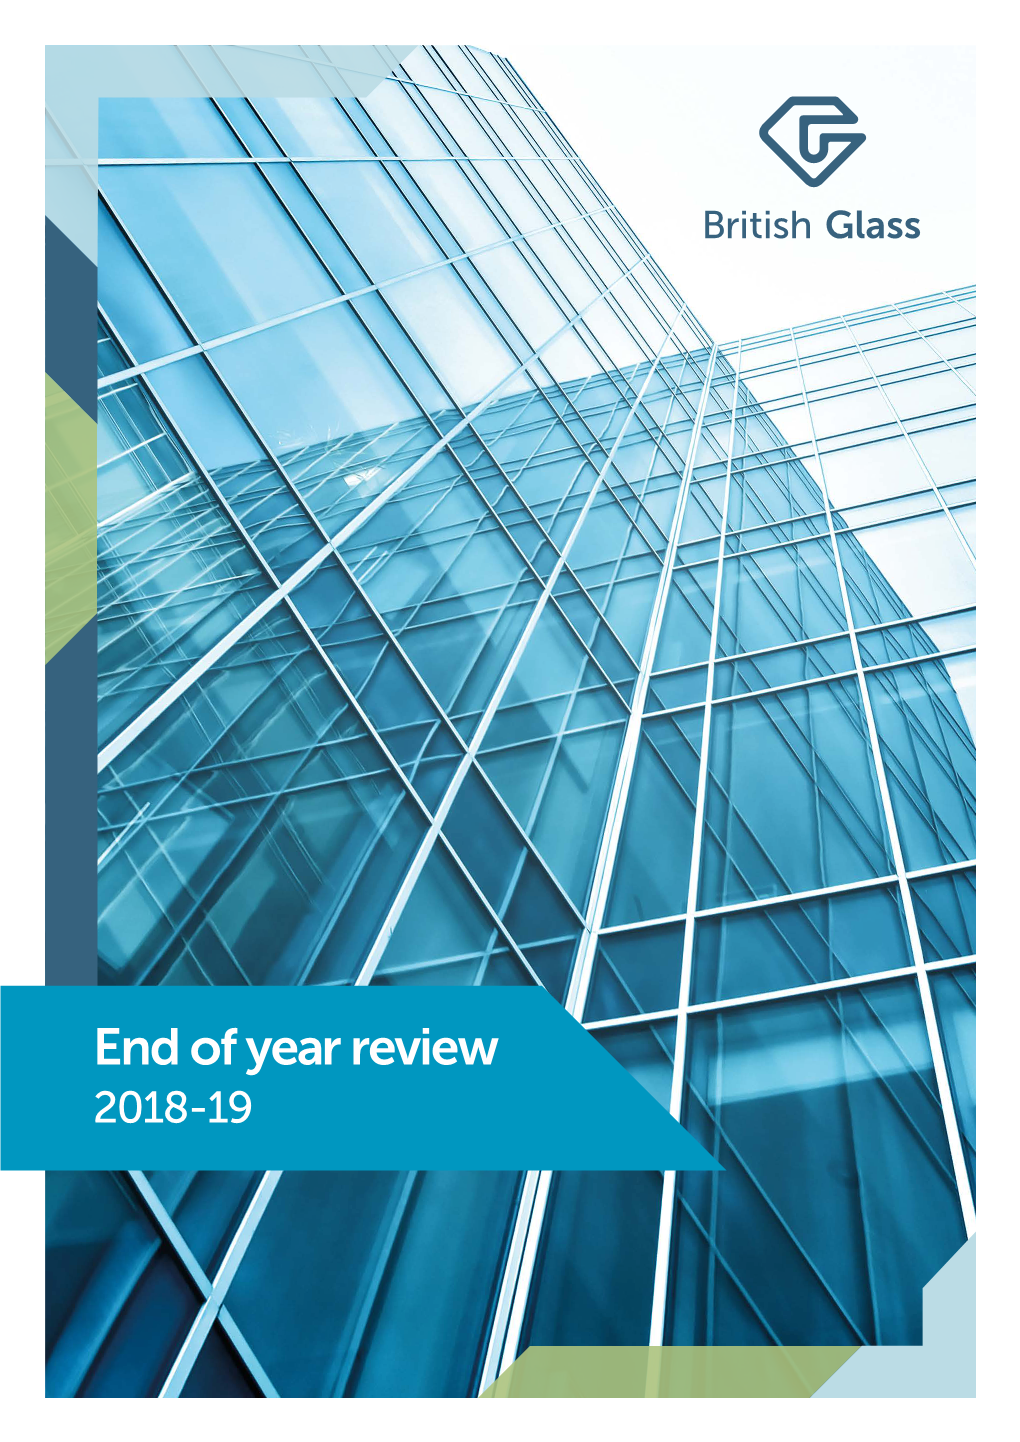 End of Year Review 2018-19 Looking Back at an Exciting Year Glass Futures Vision Moves Closer